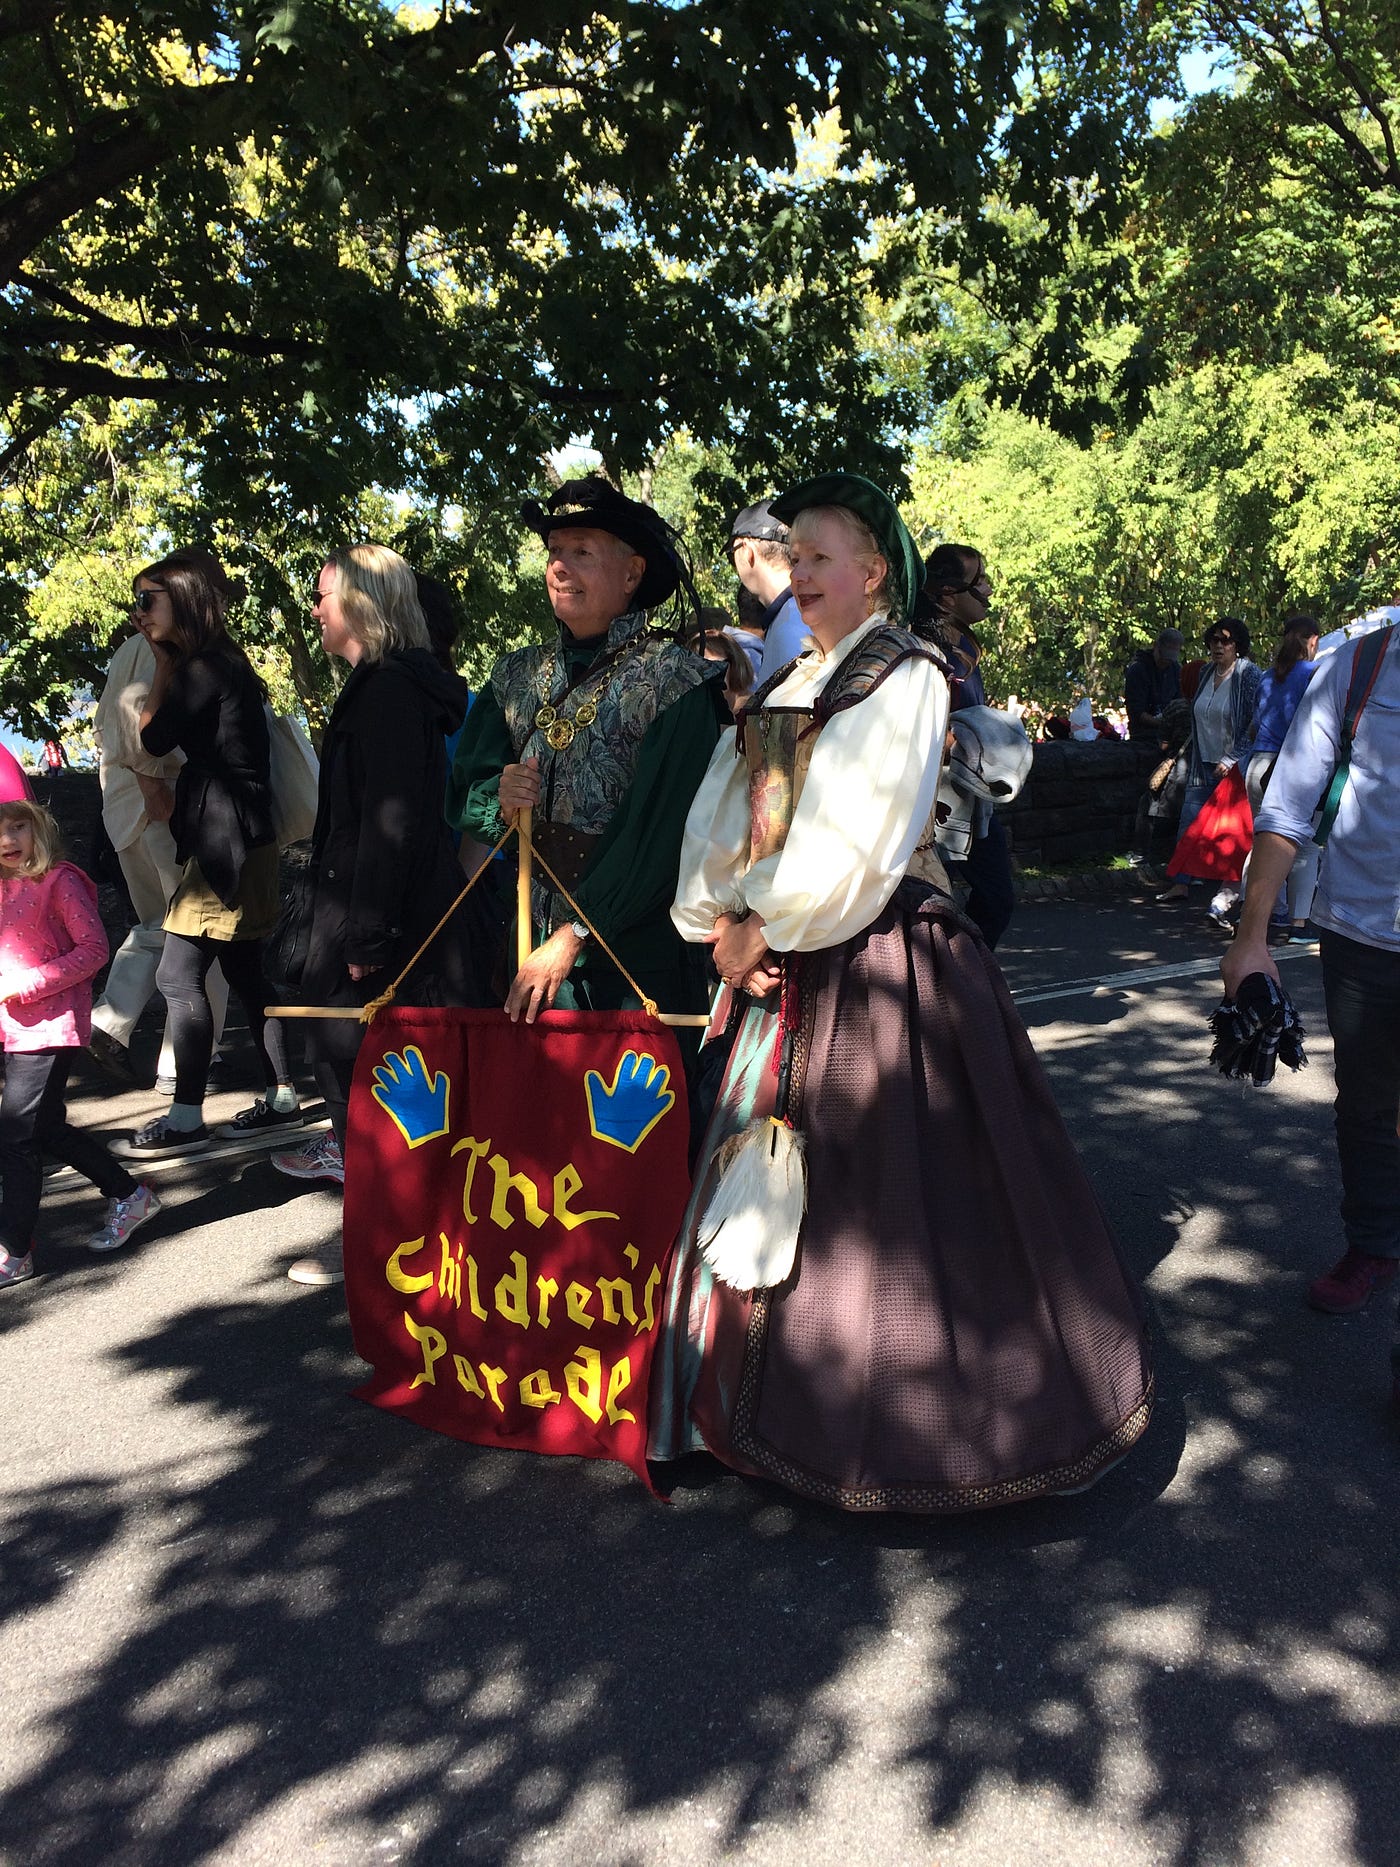 Medieval Festival Returns to Fort Tryon Park by Steward Medium